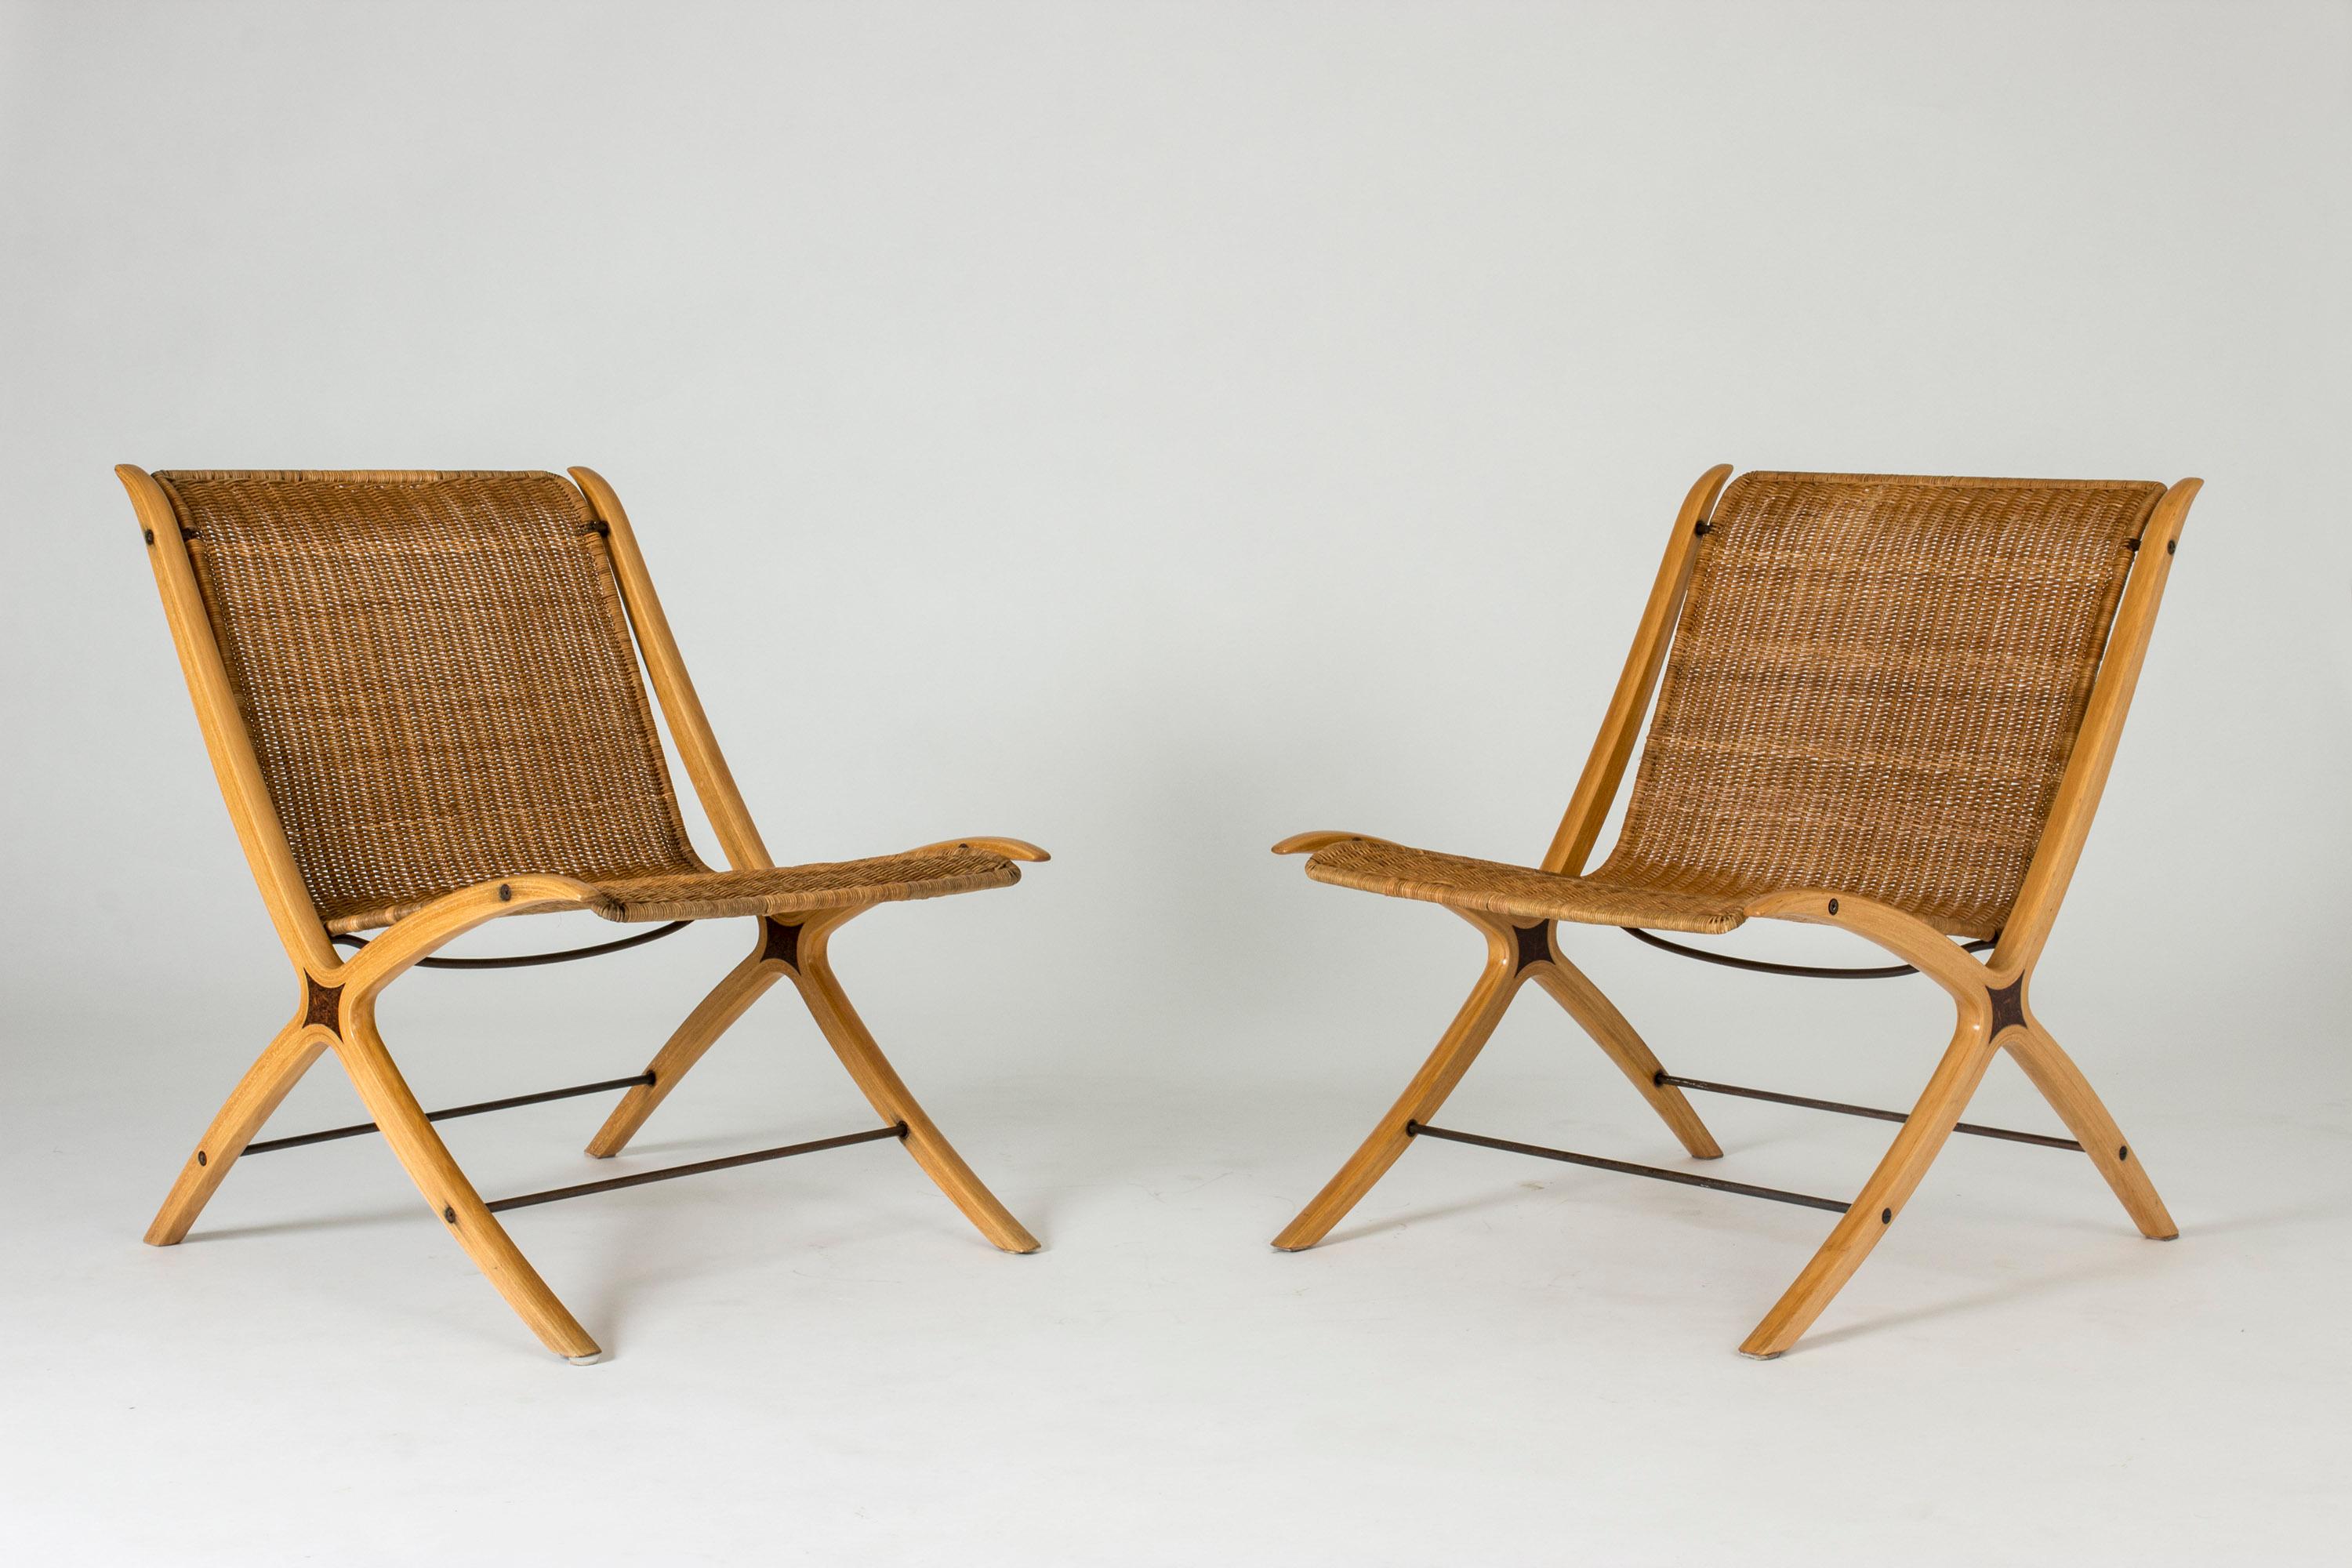 Pair of amazing “X” lounge chairs by Peter Hvidt and Orla Møllgaard, made from laminated beech and rattan. Cool detail of darker wood inlays at the cross section of the legs and back. Beautiful, unbroken lines.